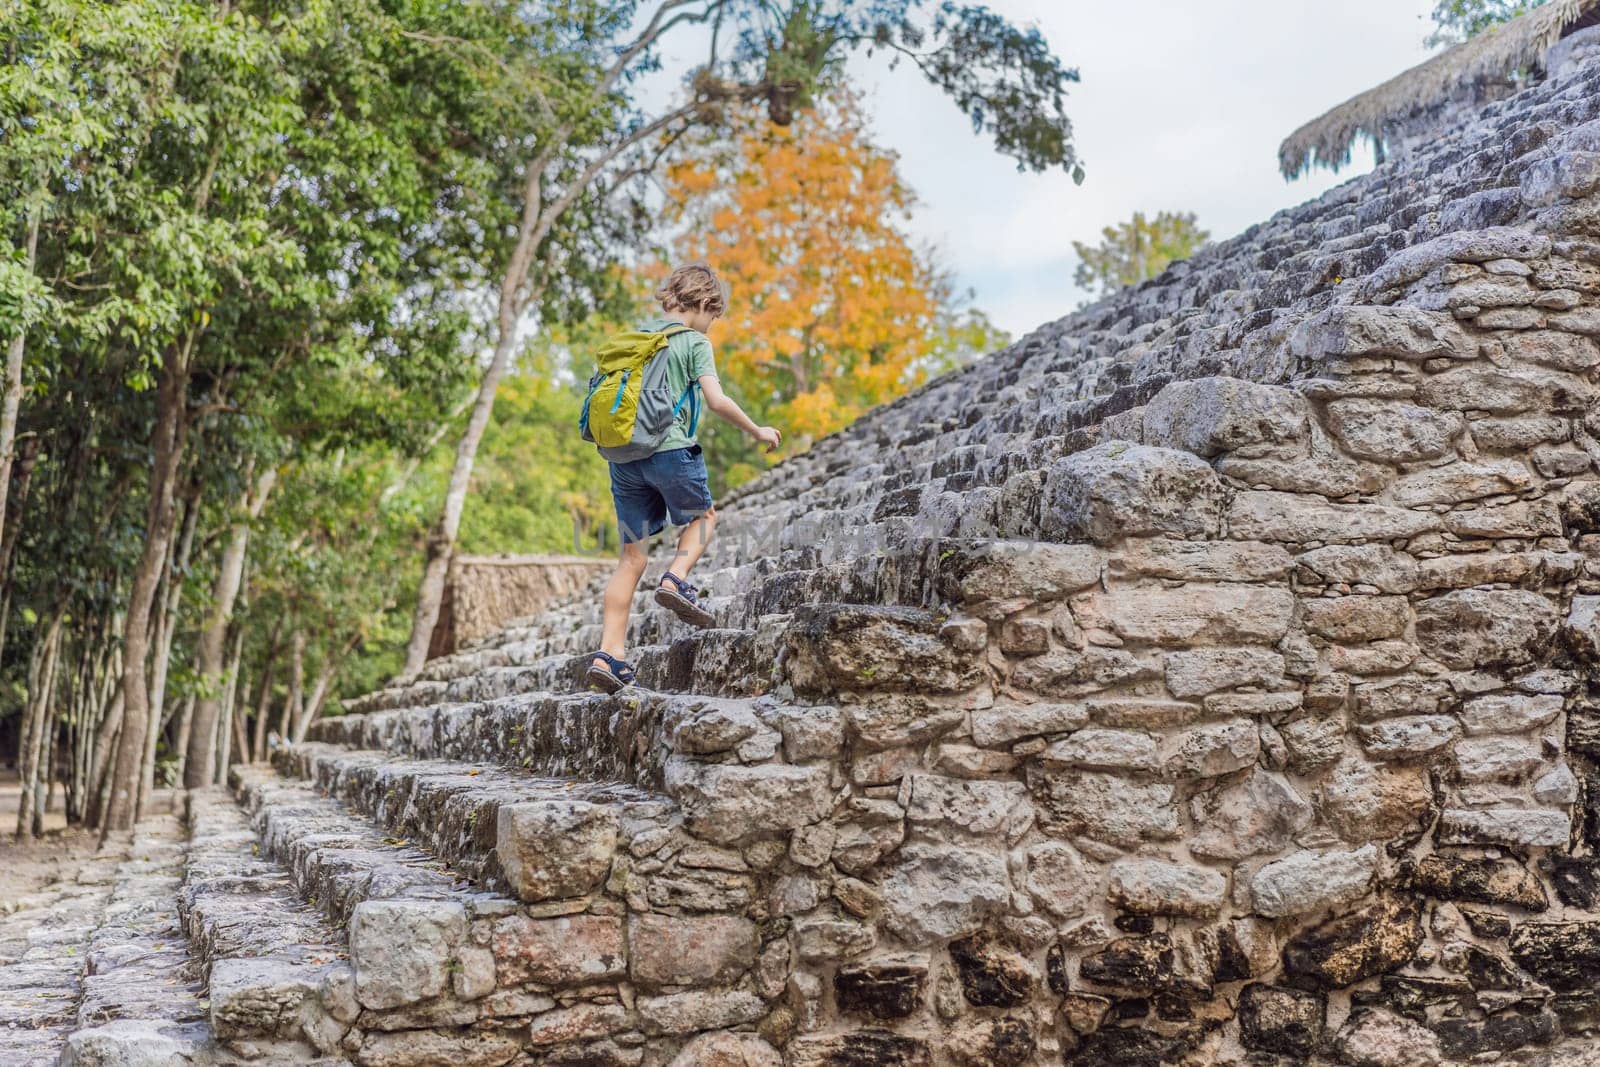 Boy tourist at Coba, Mexico. Ancient mayan city in Mexico. Coba is an archaeological area and a famous landmark of Yucatan Peninsula. Cloudy sky over a pyramid in Mexico by galitskaya